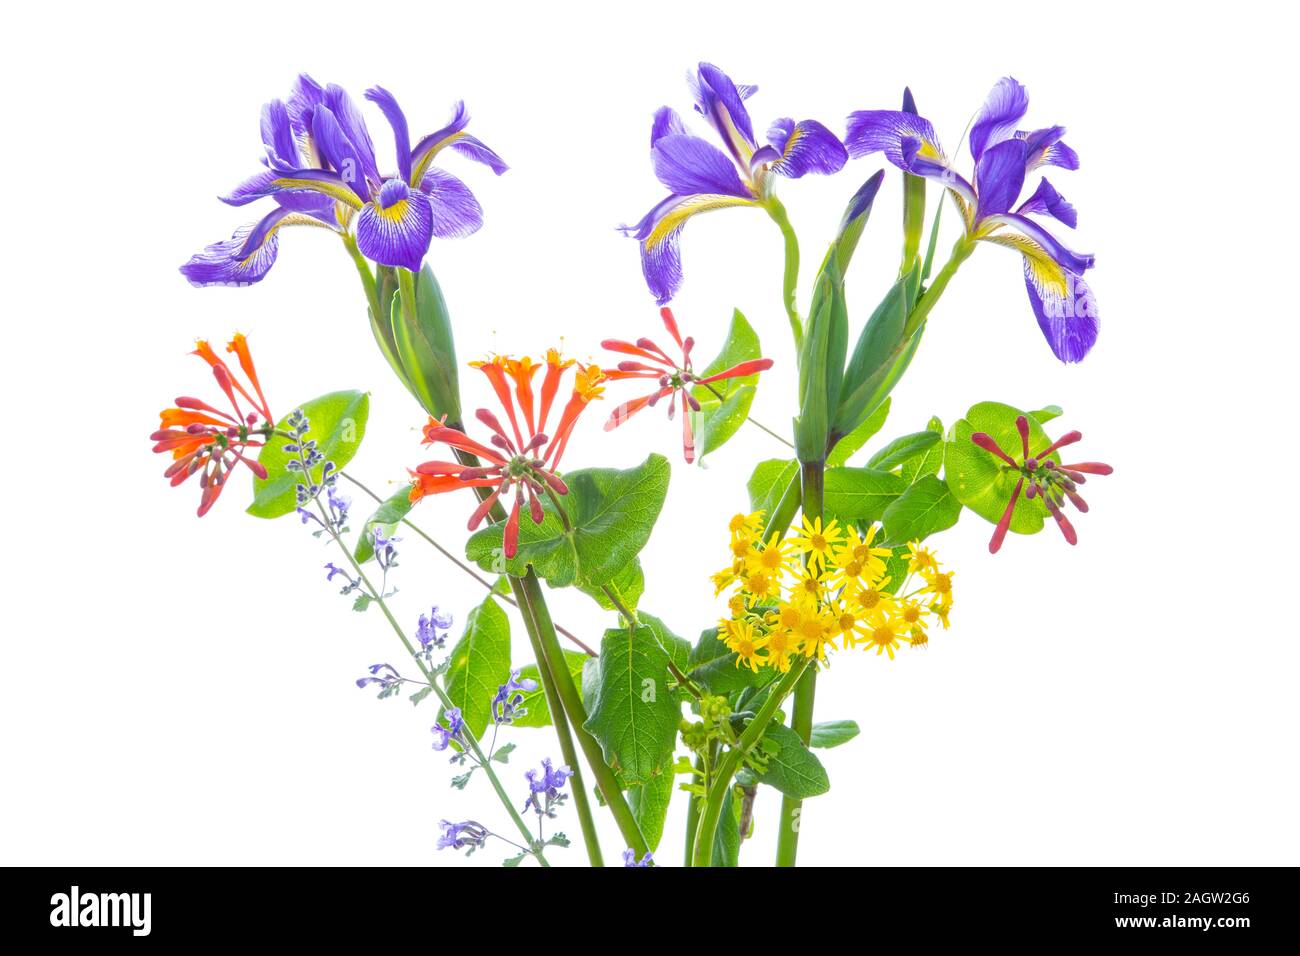 30099-00805 Blue Flag Iris, Dropmore Scarlet Honeysuckle, Russian Sage & Butterweed (high key white background) Marion Co. IL Stock Photo